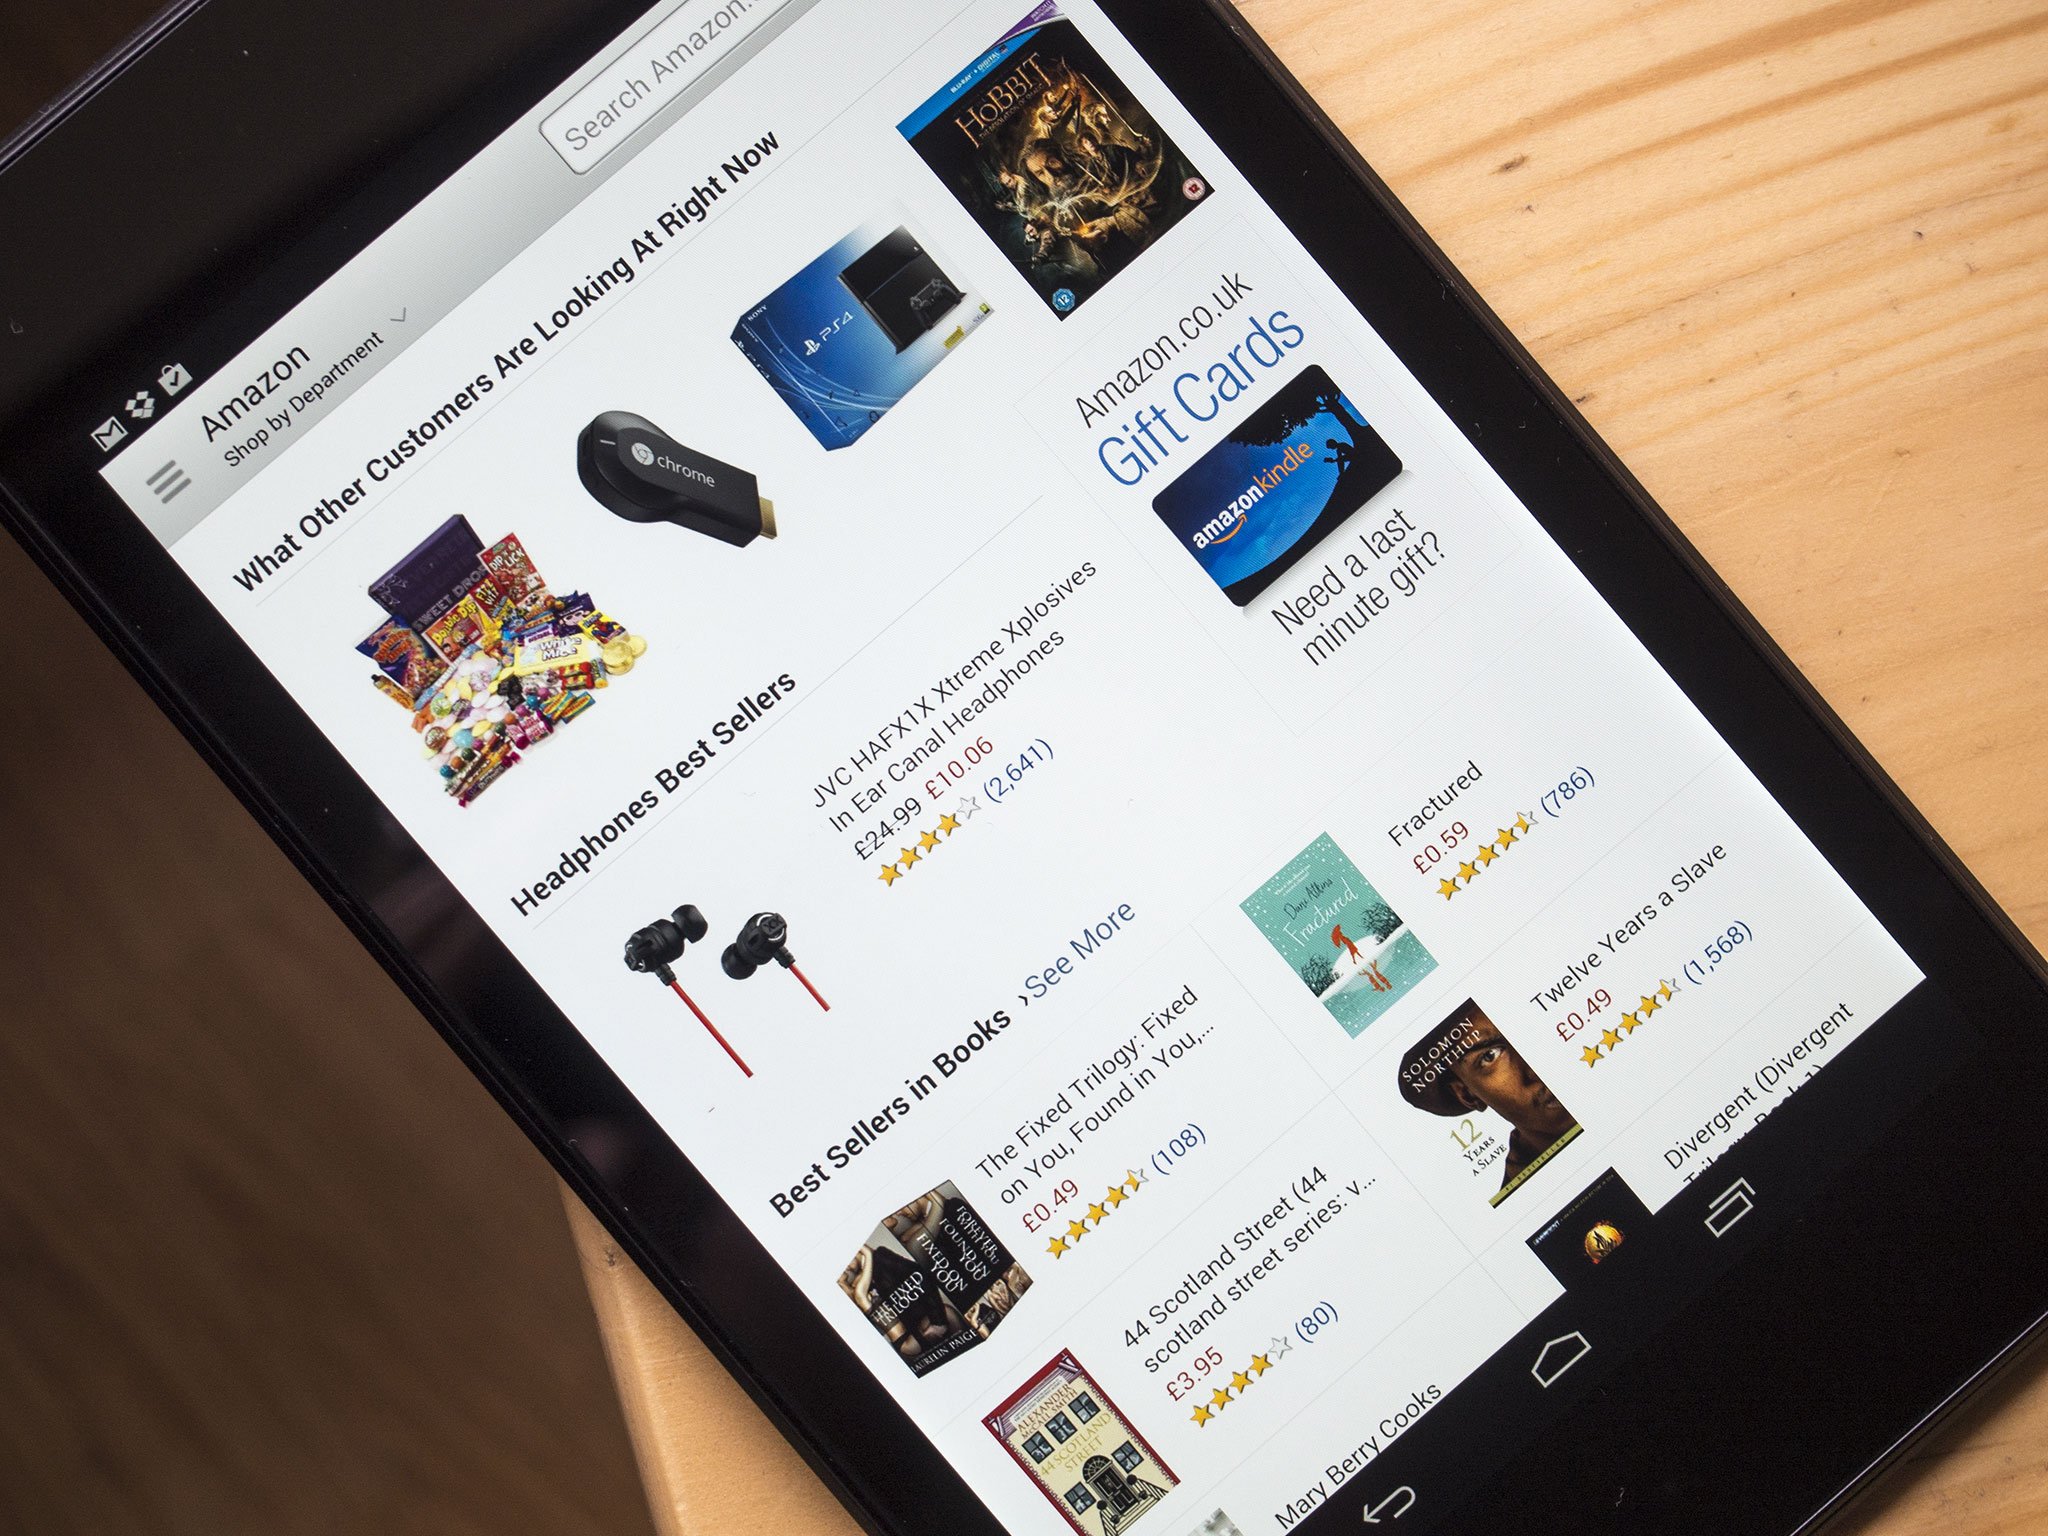 Amazon for tablets